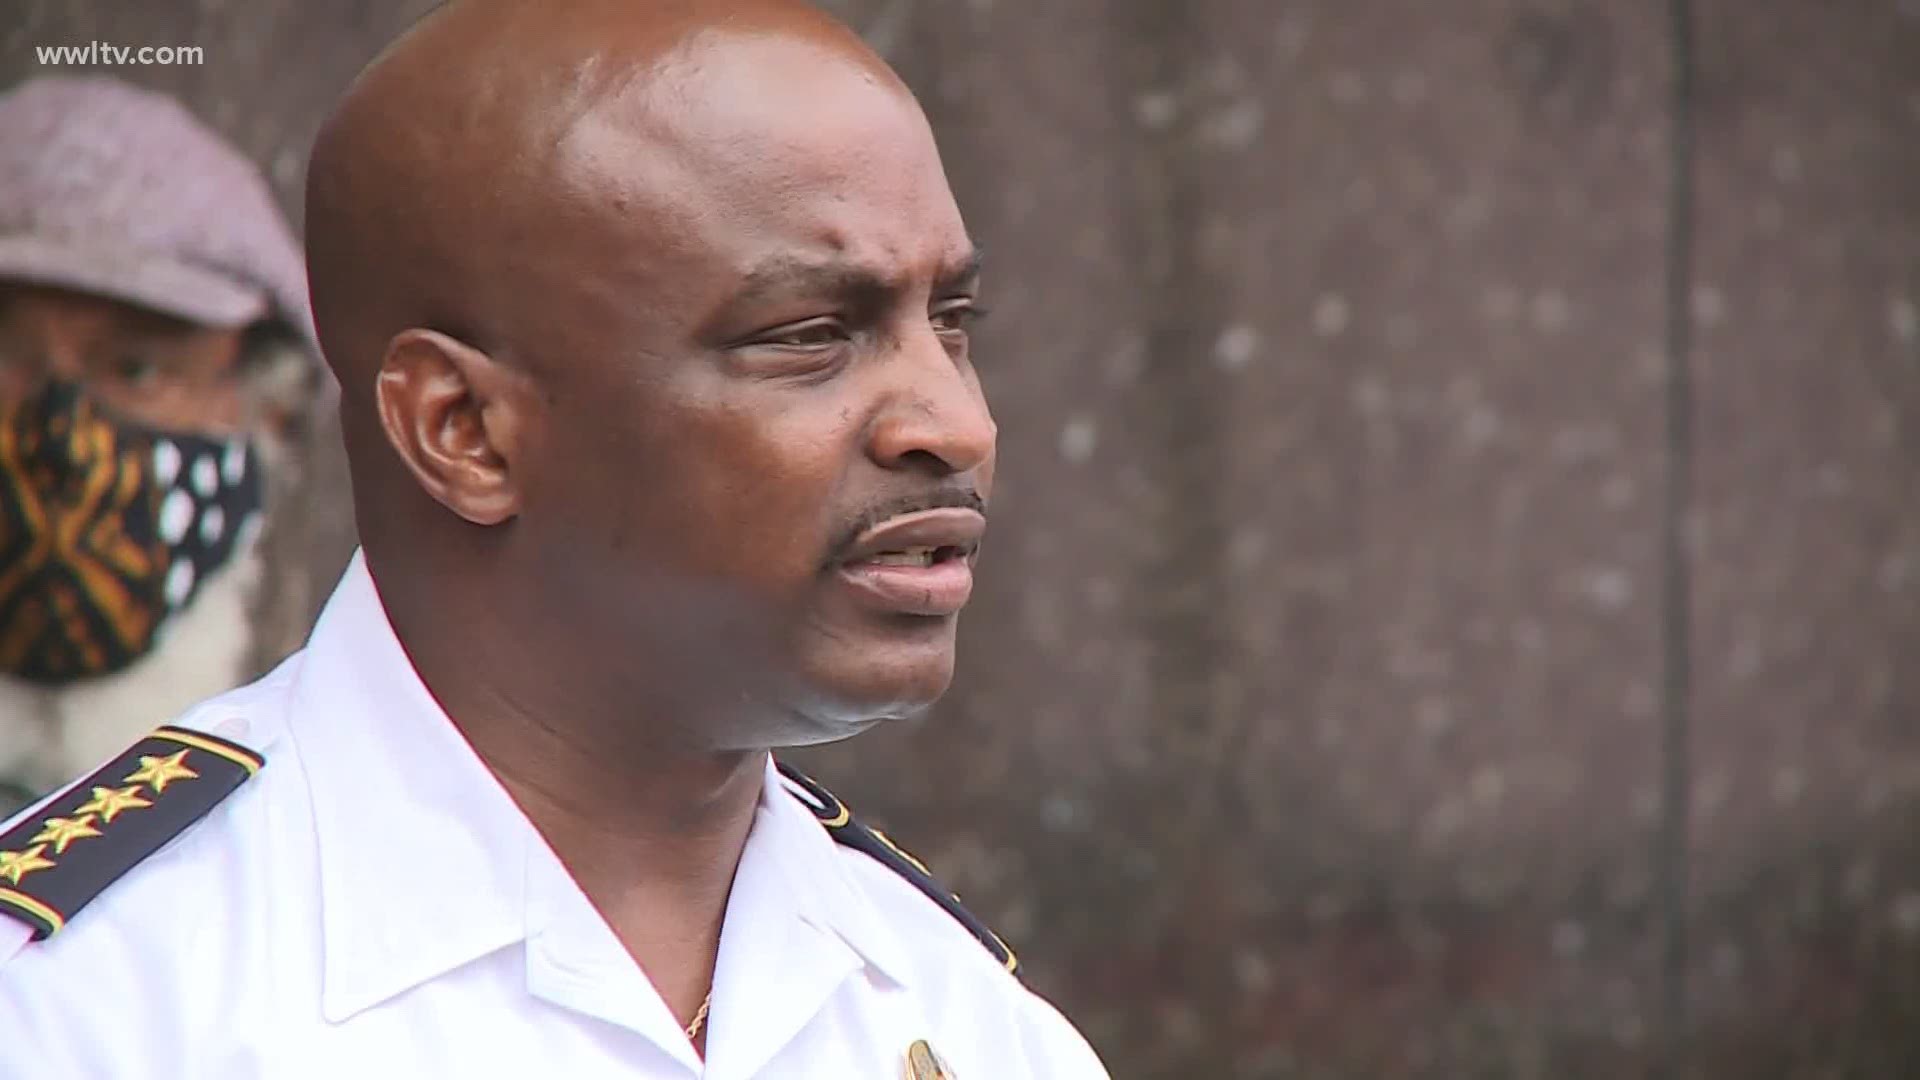 Chief Ferguson noted that there has not been any proof of 'outside agitators' at New Orleans protests so far.